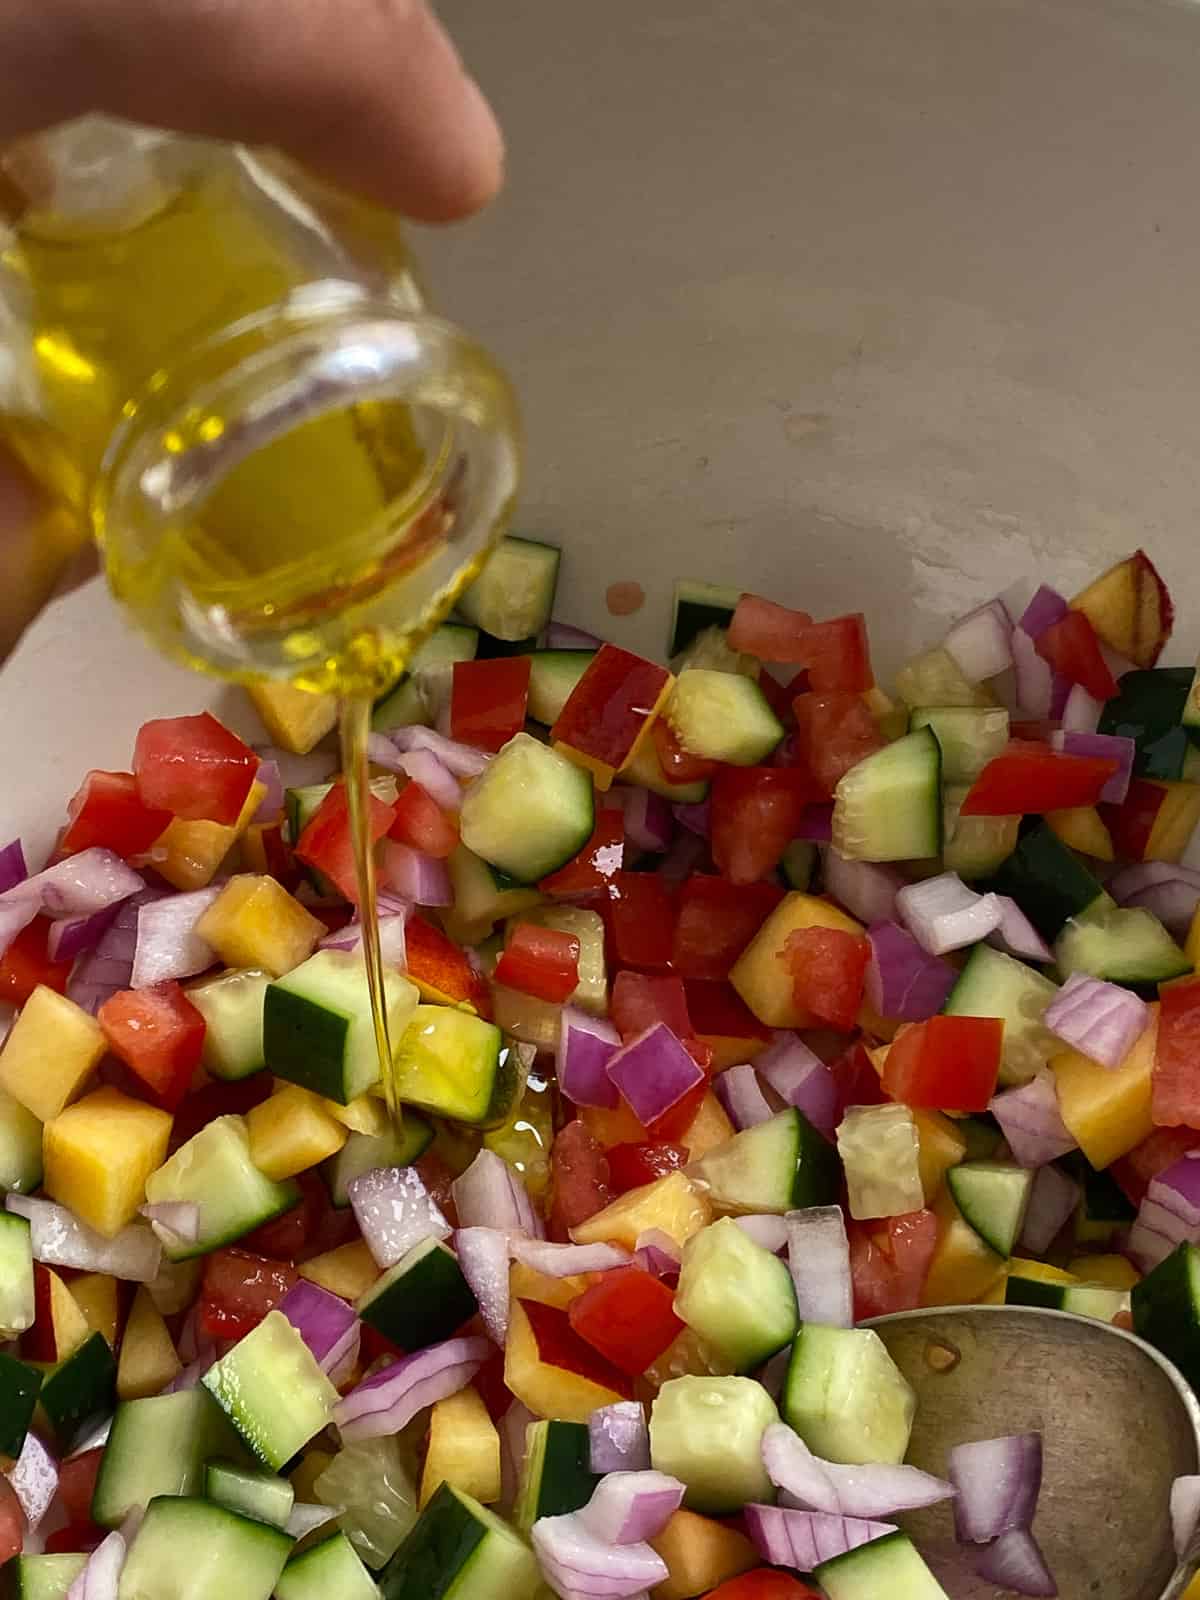 olive oil being added to bowl of veggies